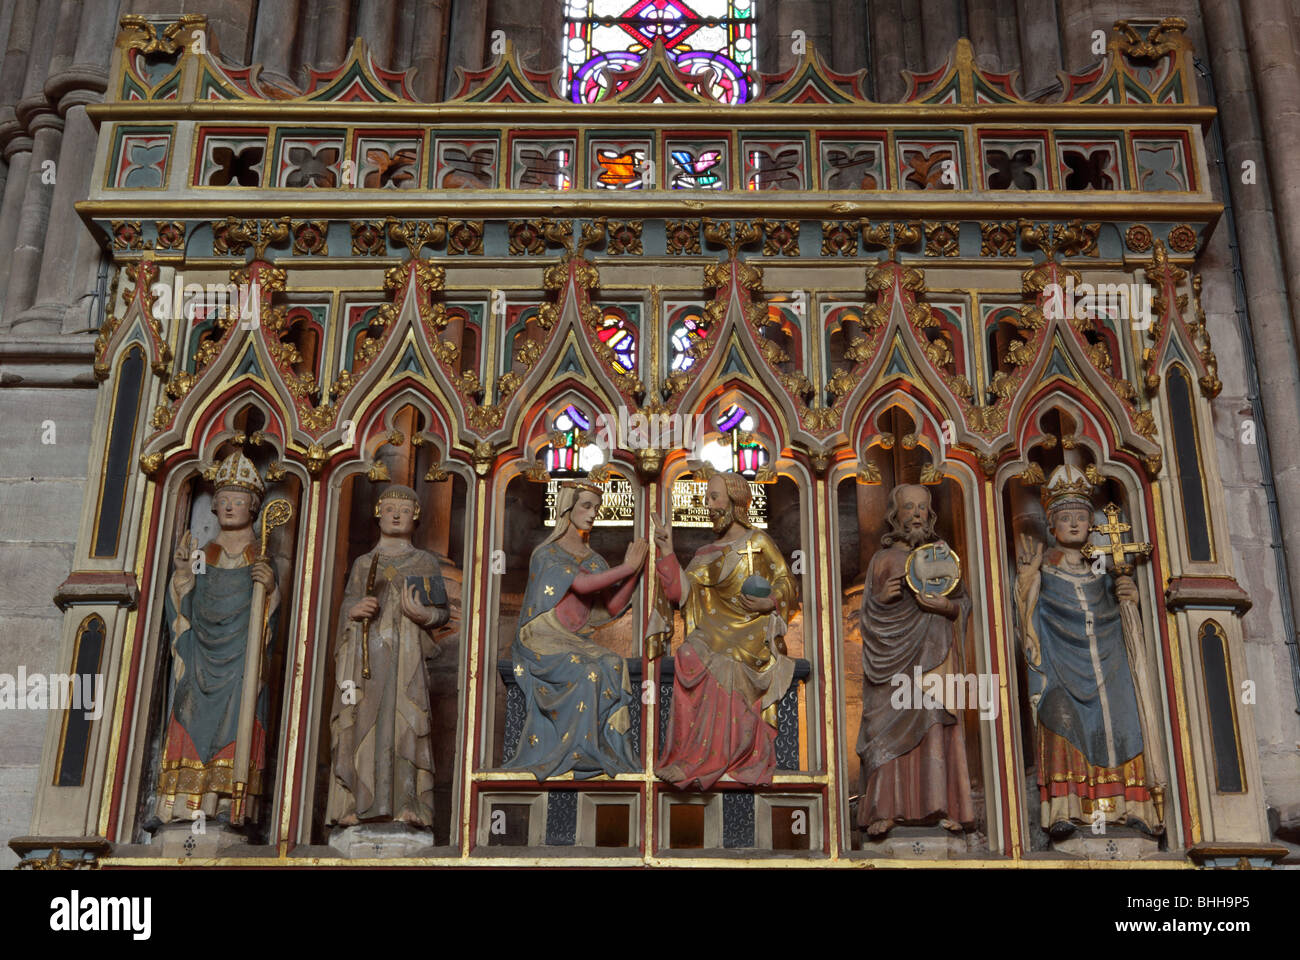 Religious figures adorn this screen in the Lady Chapel at Hereford Cathedral. Stock Photo